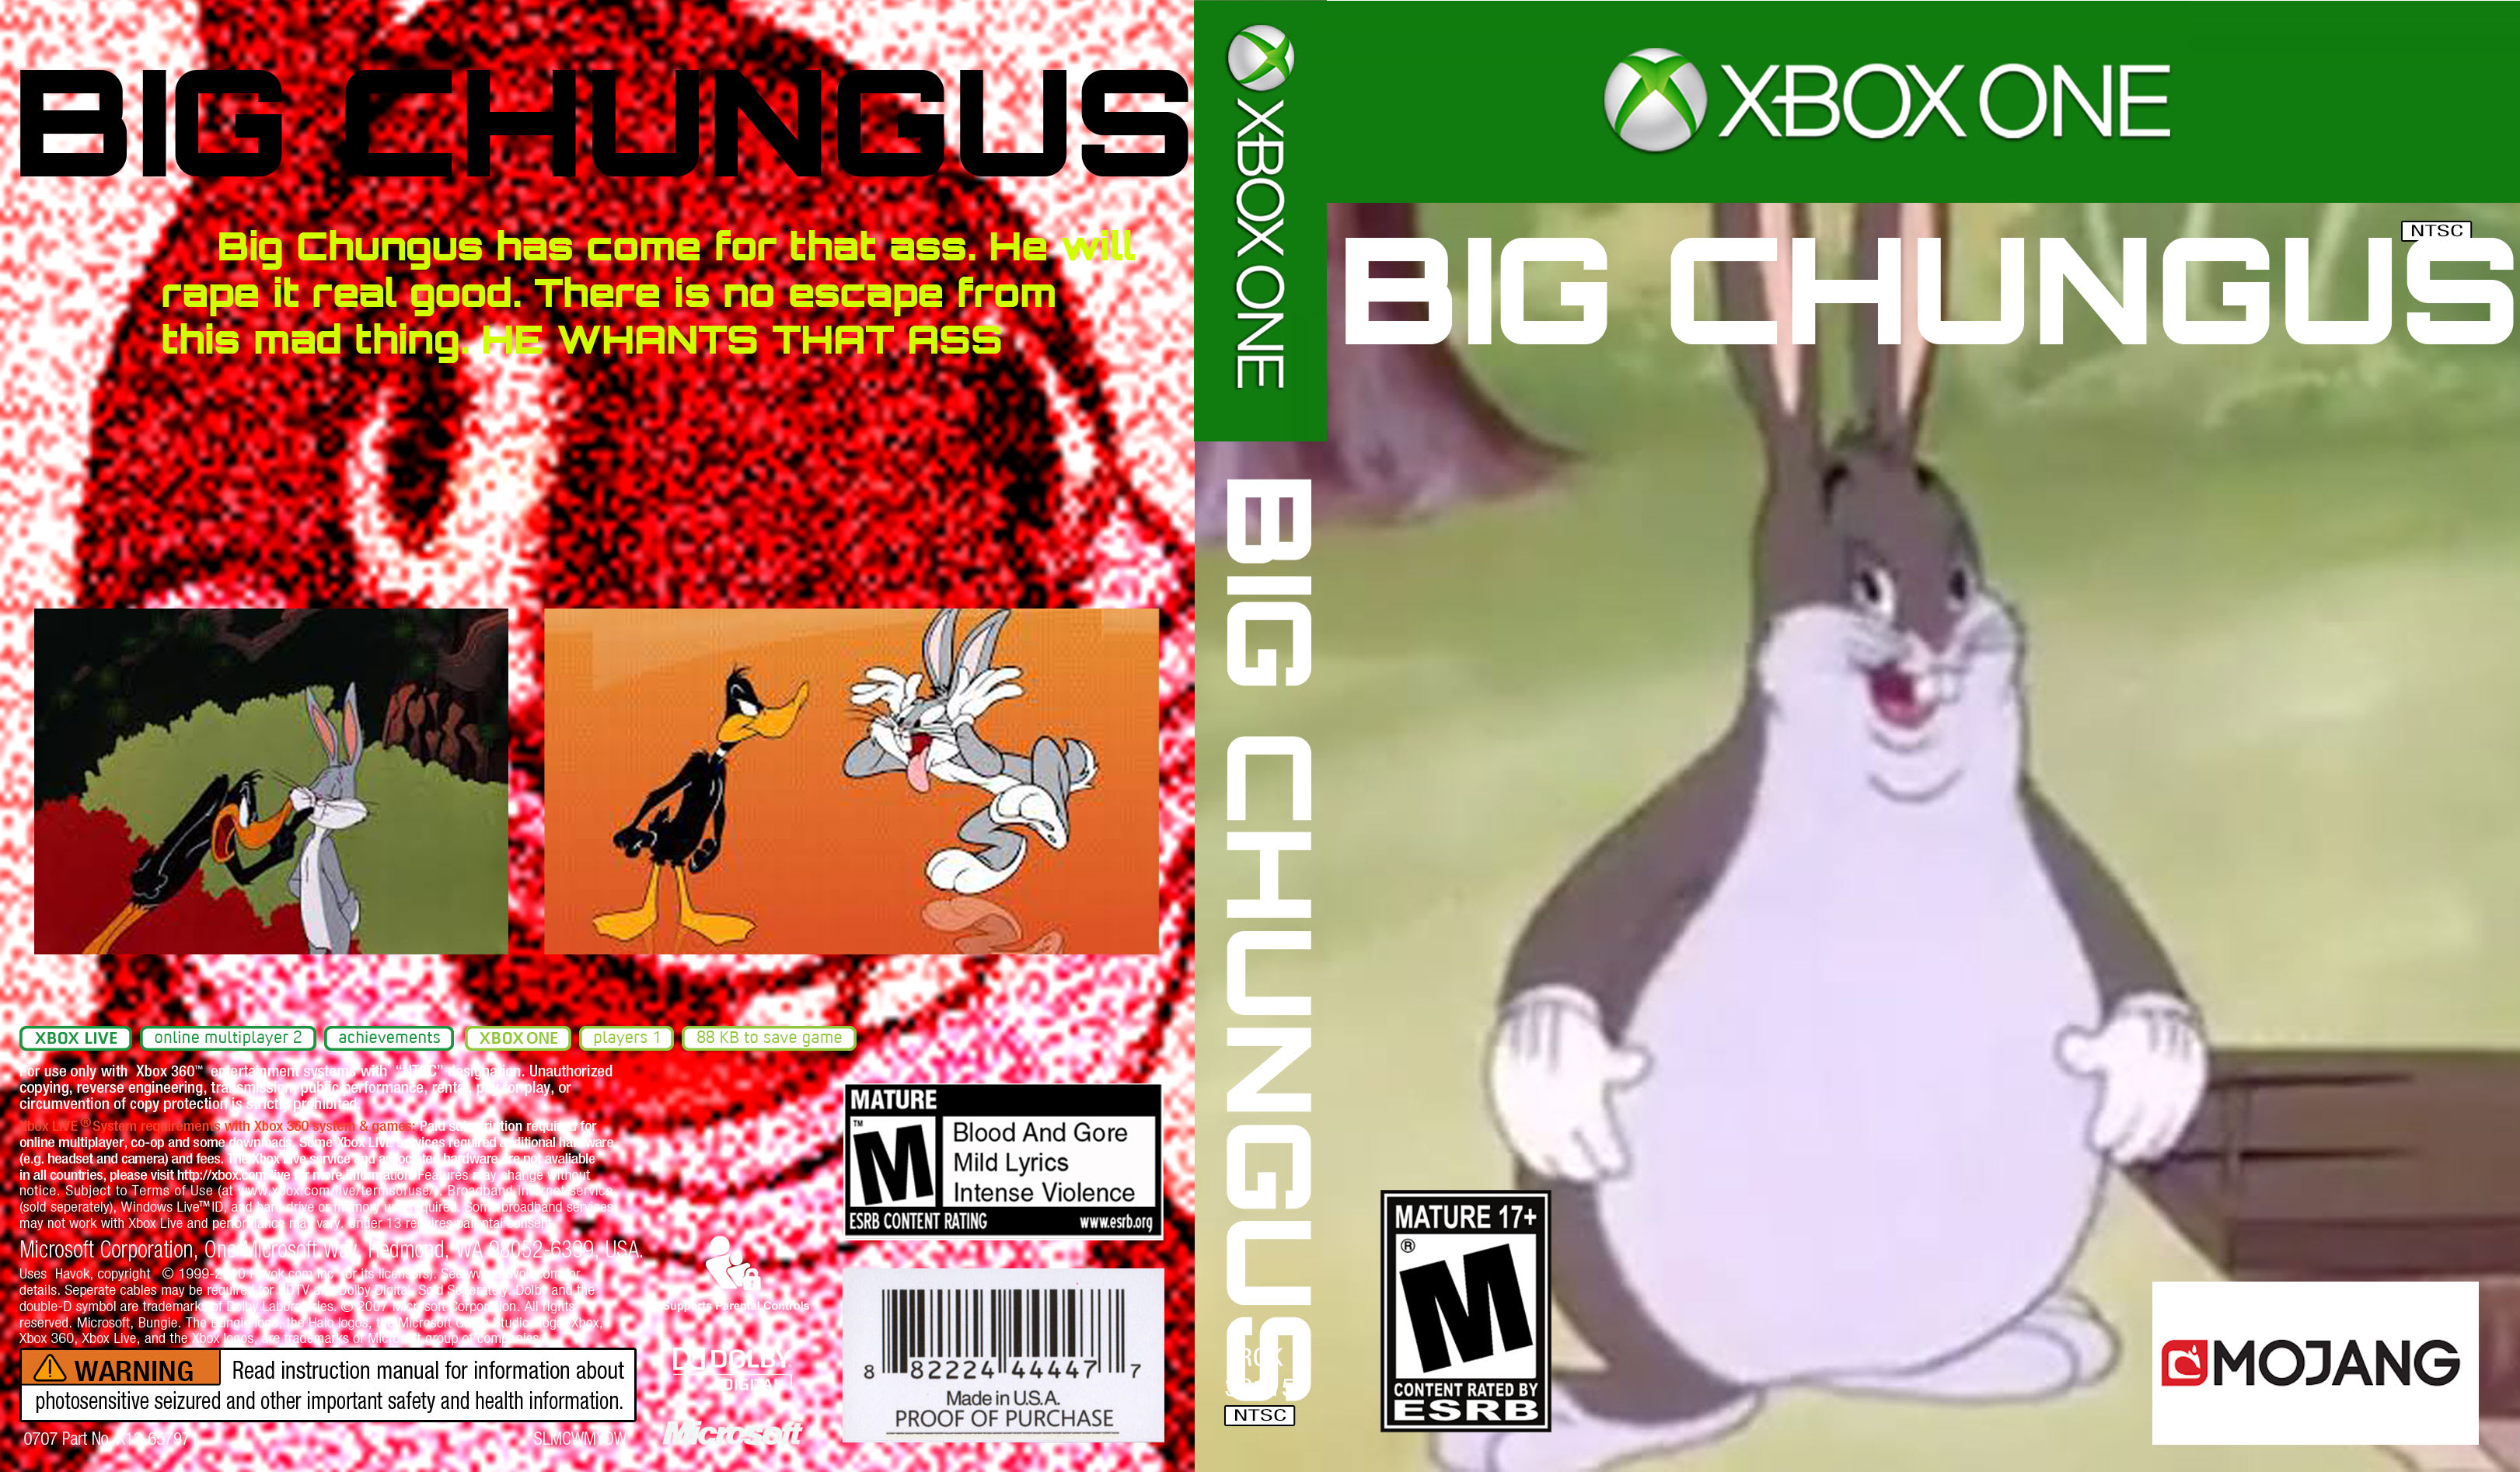 Make A Meme Game Big Chungus For The Ps4 Or Other Things By Yeetbois42069 - making big chungus a roblox account